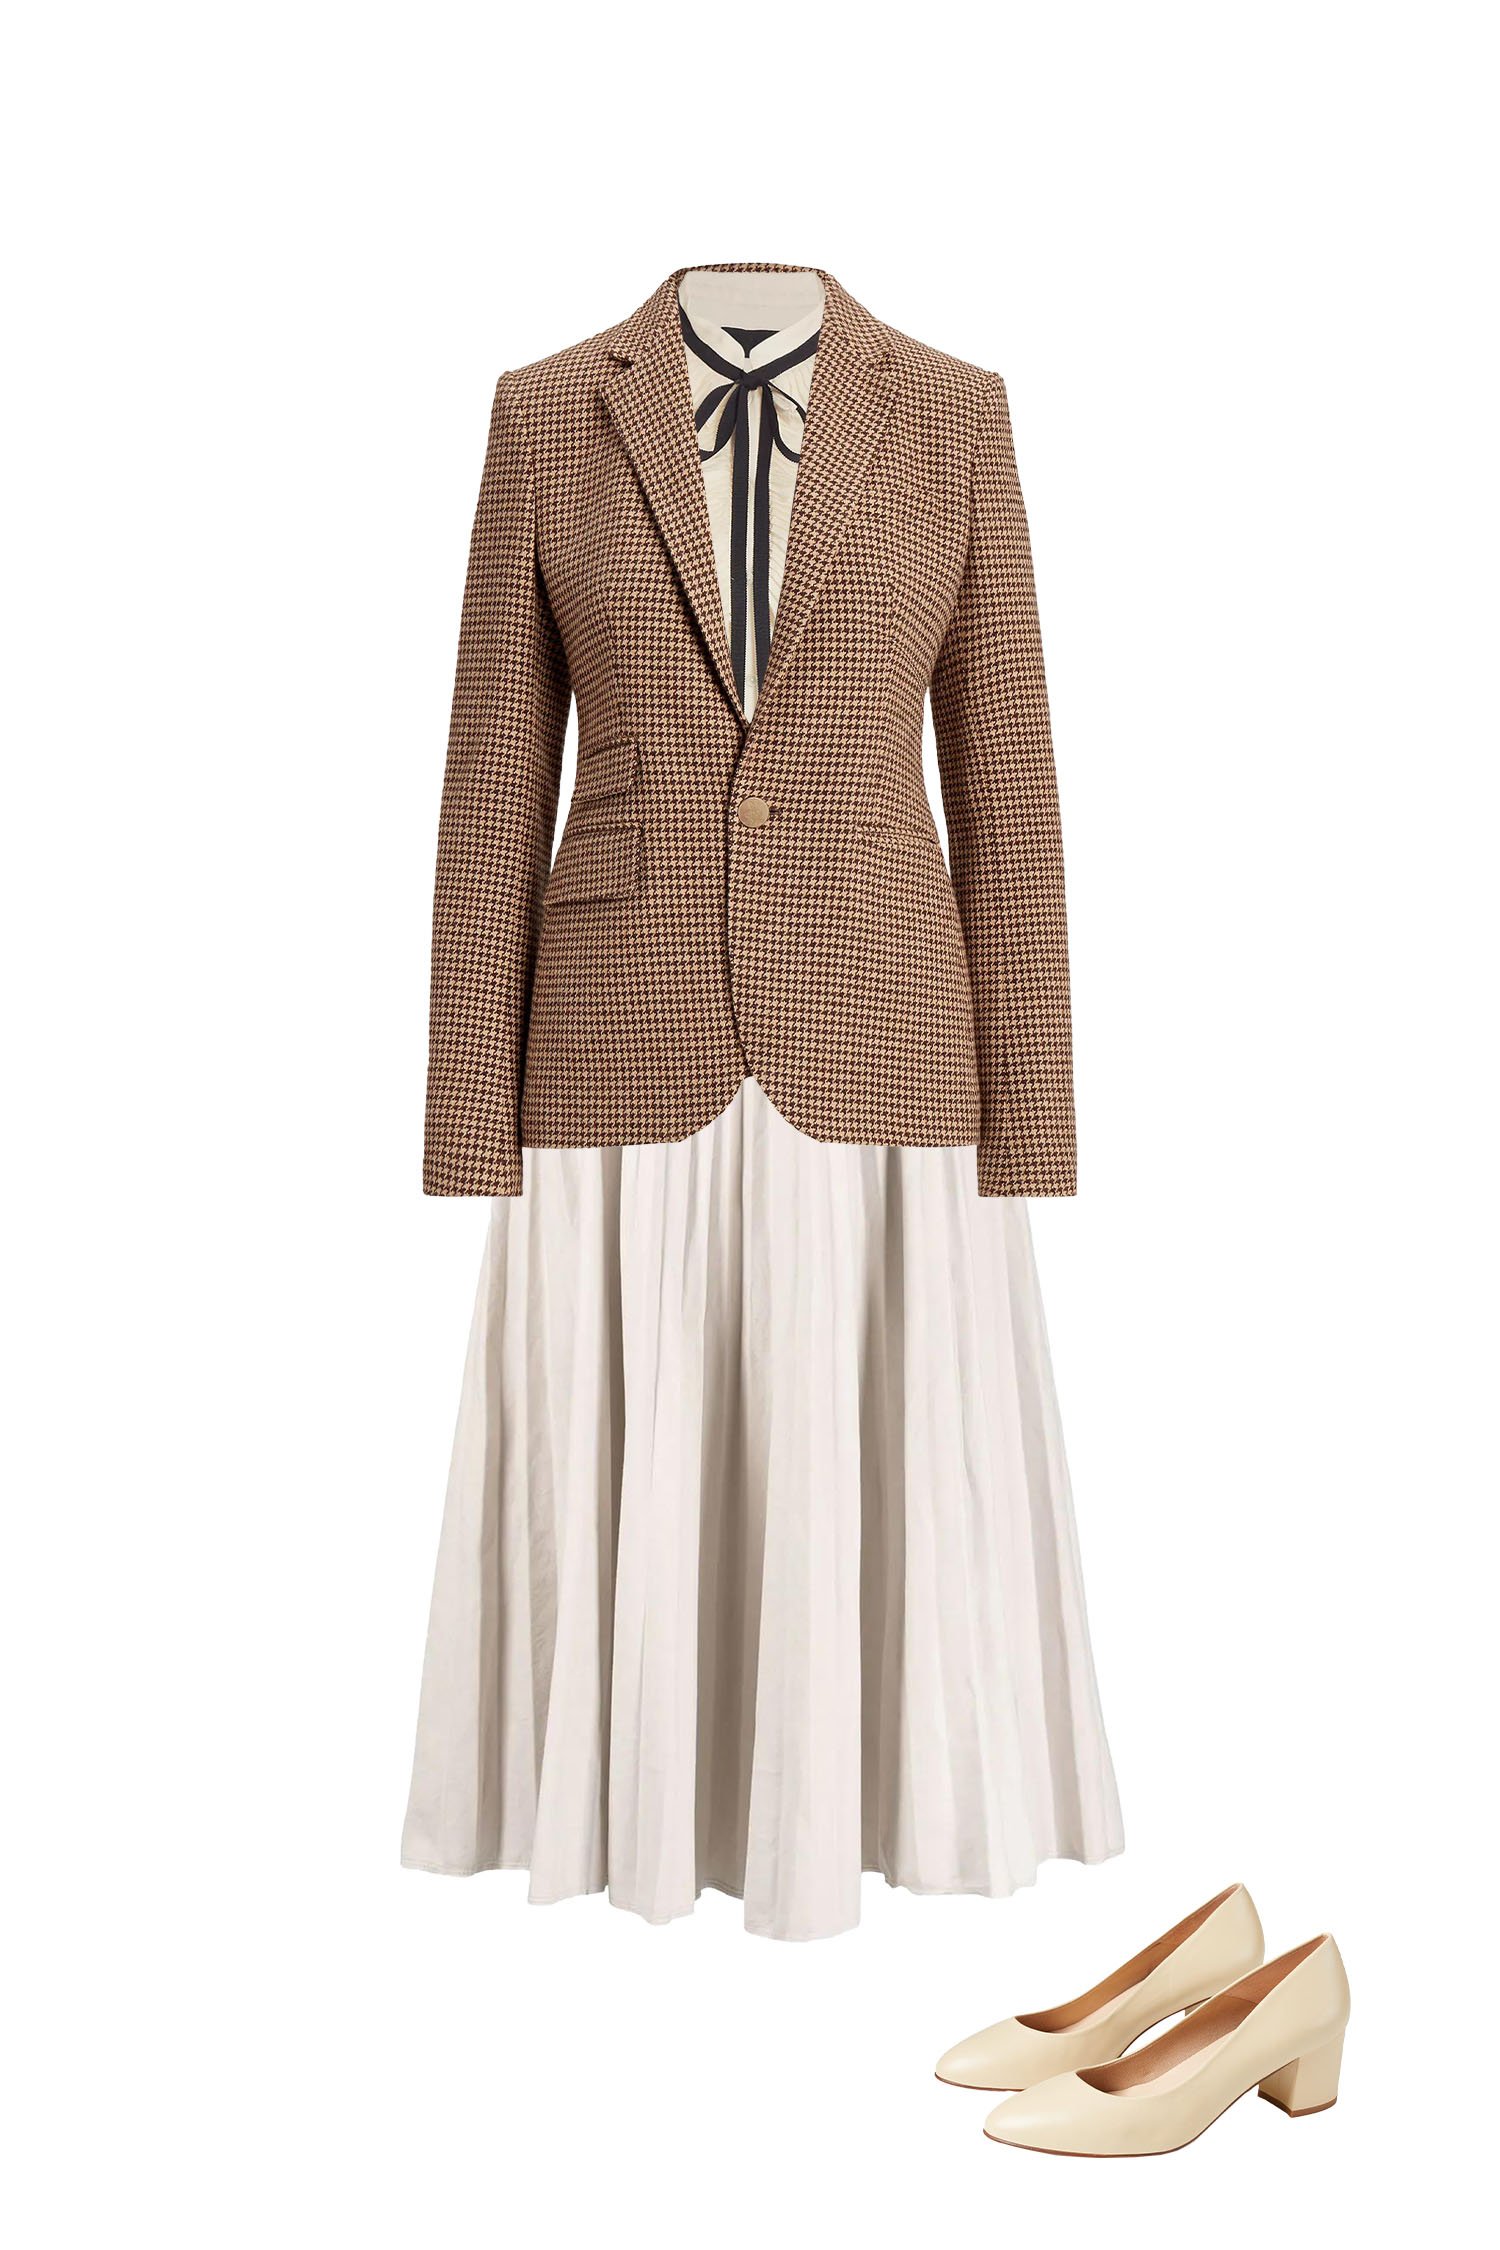 Spring Office Outfit - Beige Pleated Midi Skirt, Cream Ruffle and Black Bow Blouse, Camel Houndstooth Blazer, Cream Block Heel Pumps